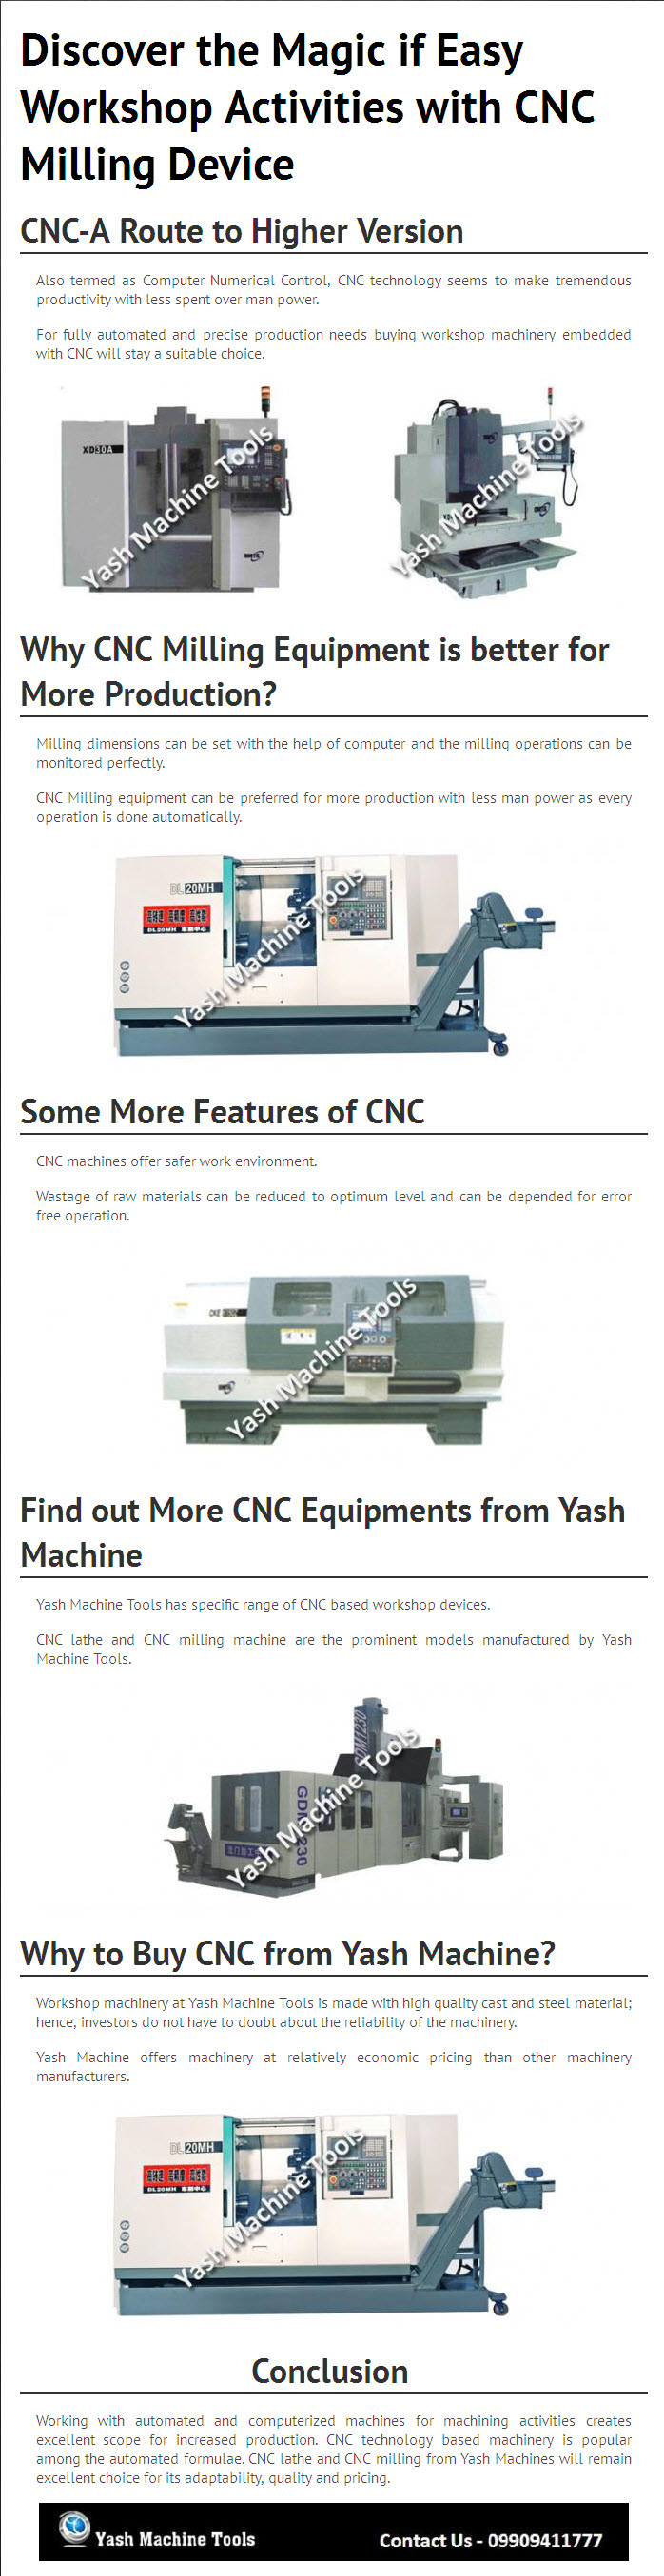 Infographic- Discover the Magic if Easy Workshop Activities with CNC M 2014-01-17 17-48-29